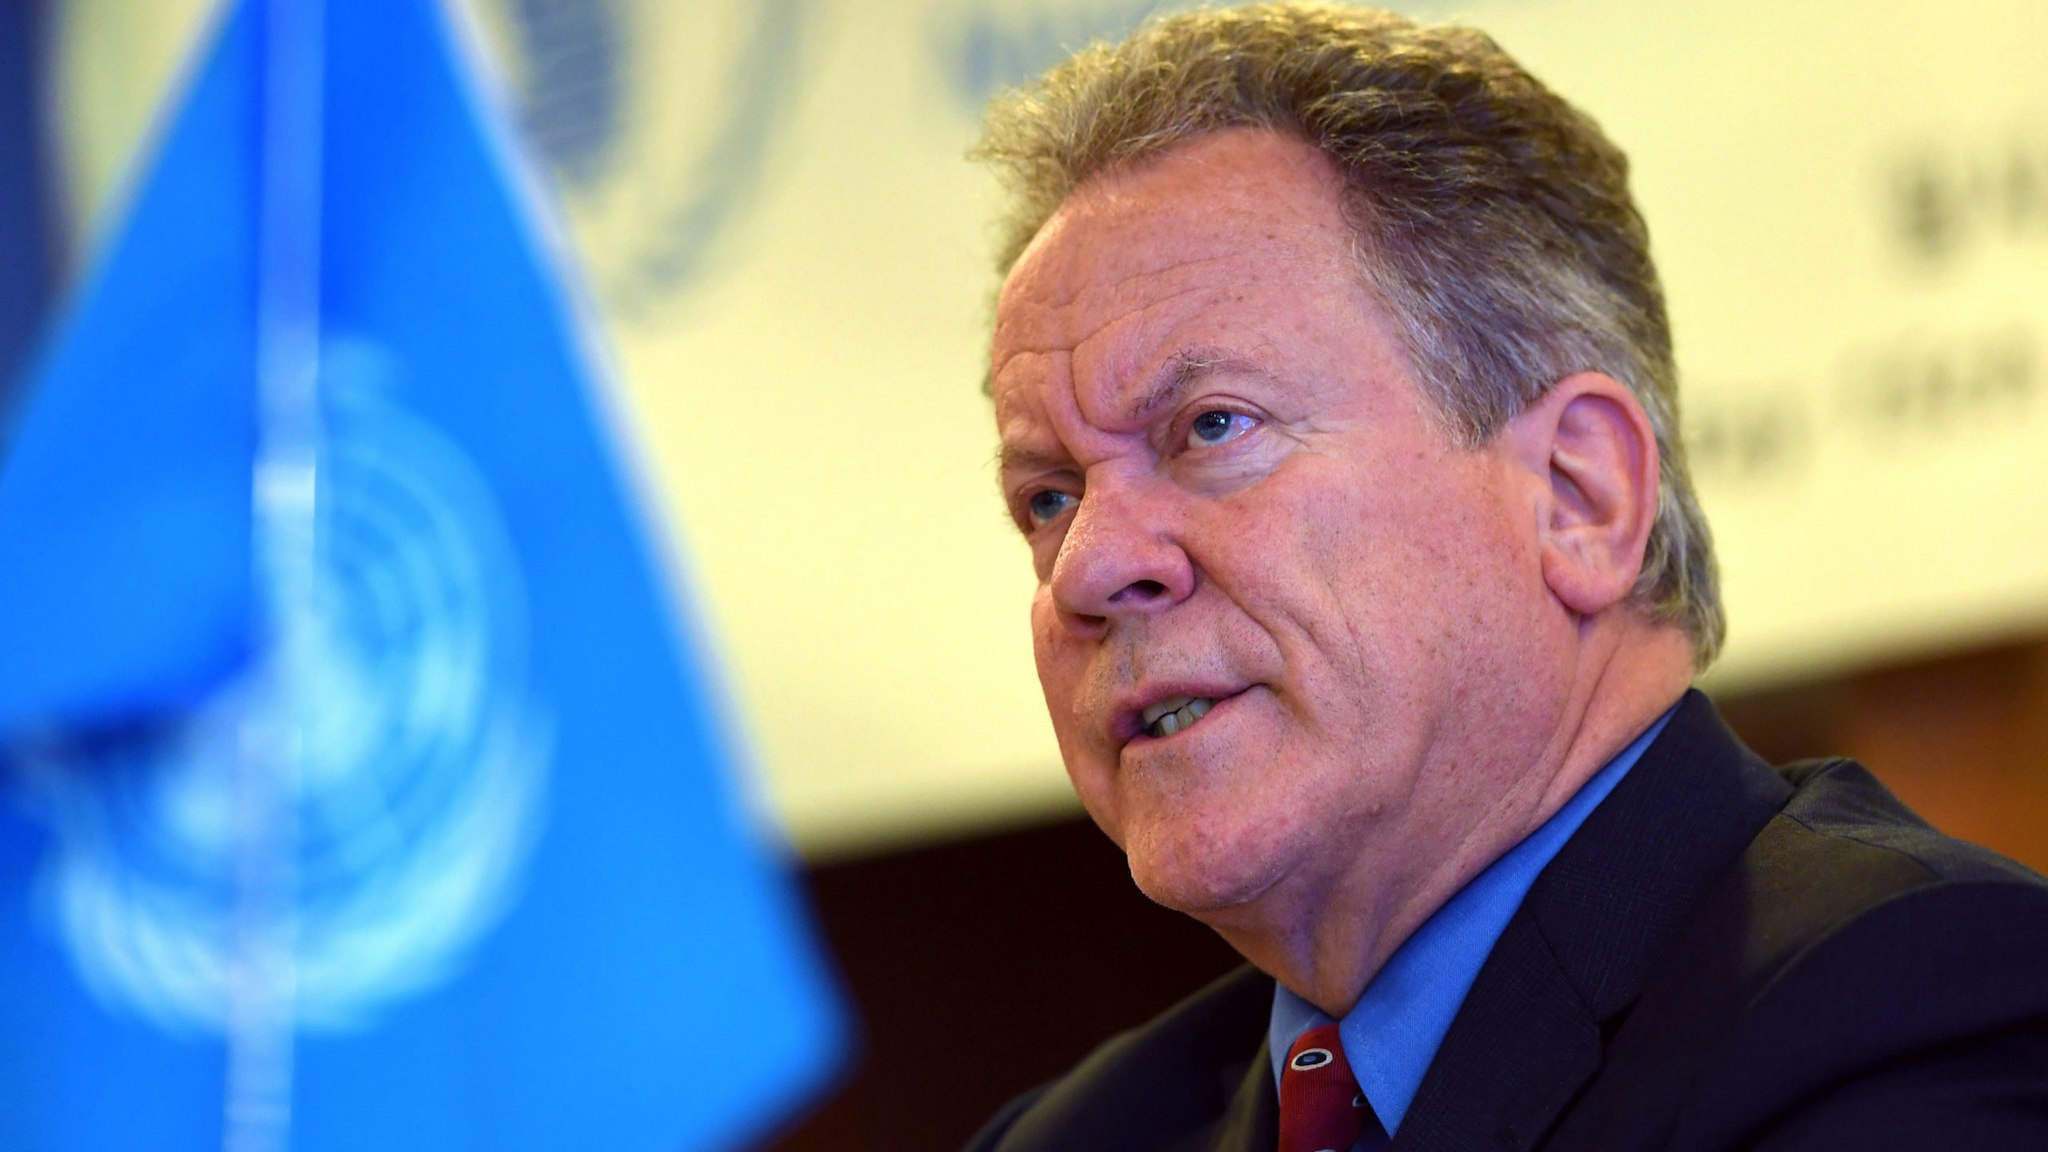 David Beasley, the United Nations World Food Programme (WFP) Executive Director, speaks during a press conference in Seoul on May 15, 2018 after his recent visit to North Korea. - North Korea is falling short of allowing proper access and monitoring for international aid, the head of the UN's World Food Programme said on May 15 following a four-day visit to the country.